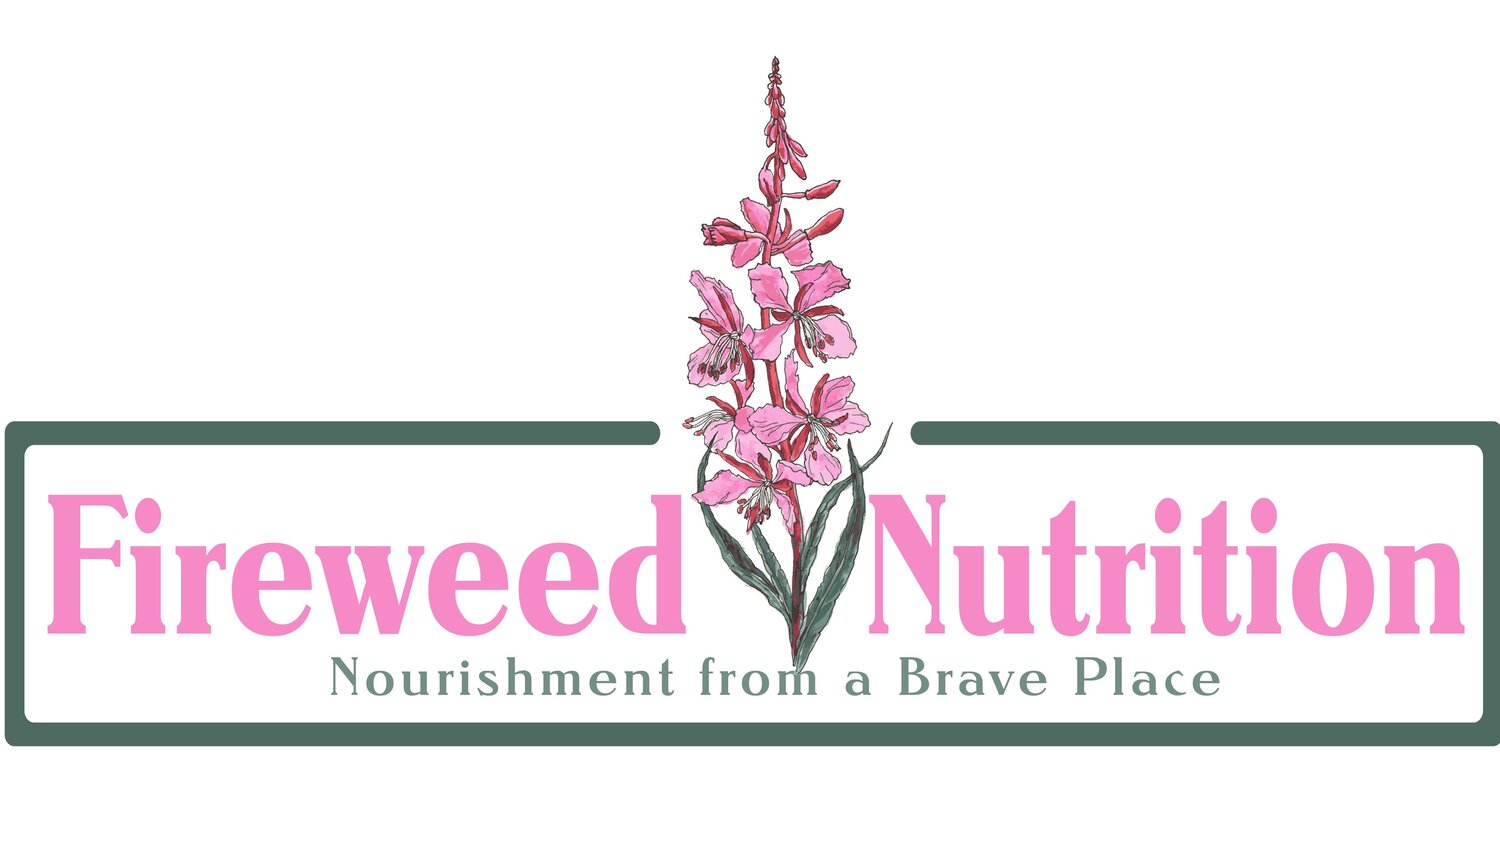 Fireweed Nutrition